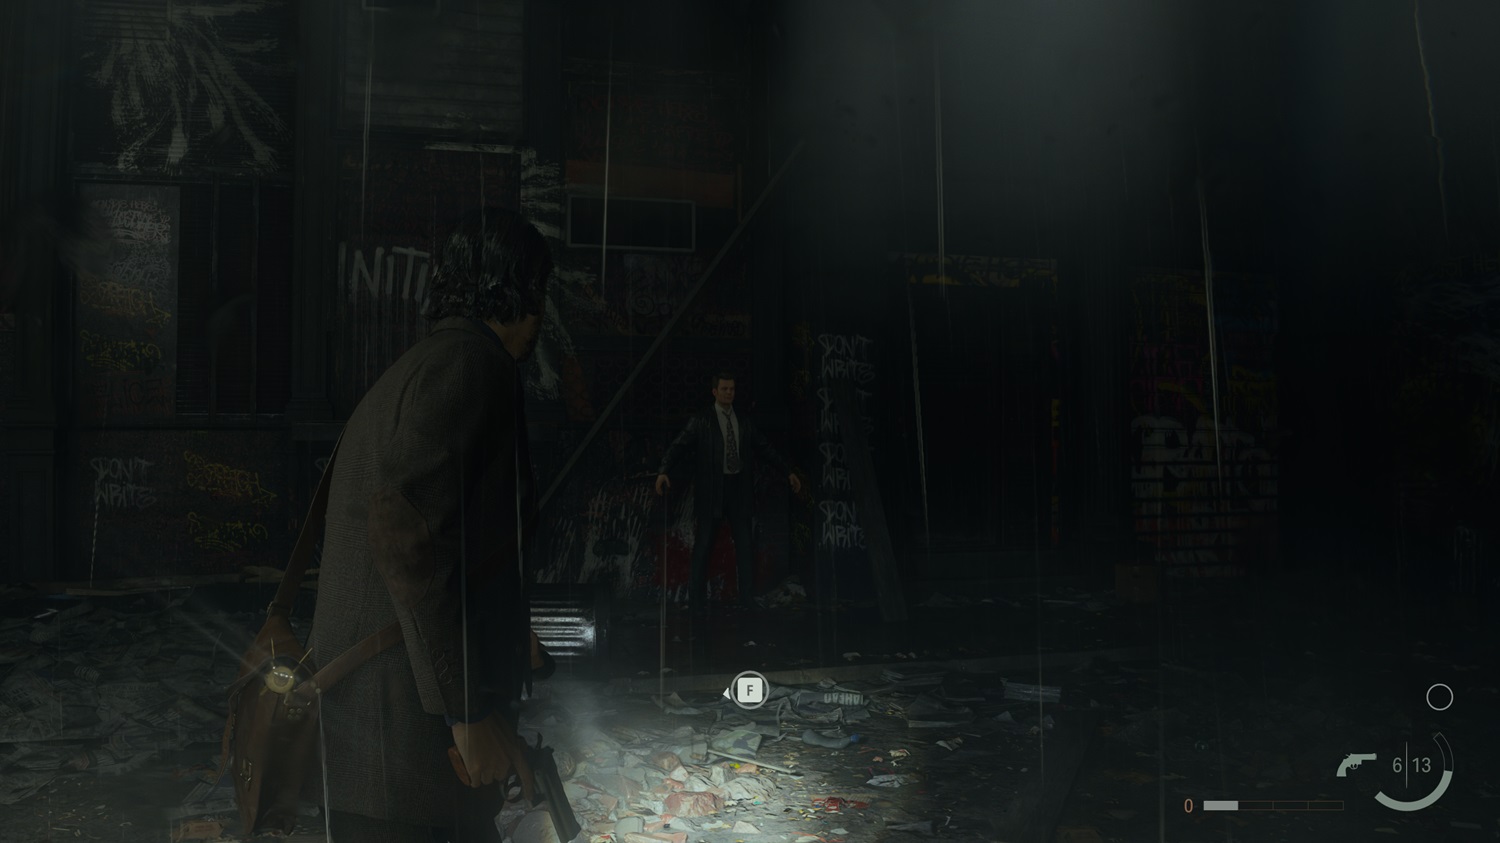 Alan Wake 2 feels like Remedy's attempt to combine the best games